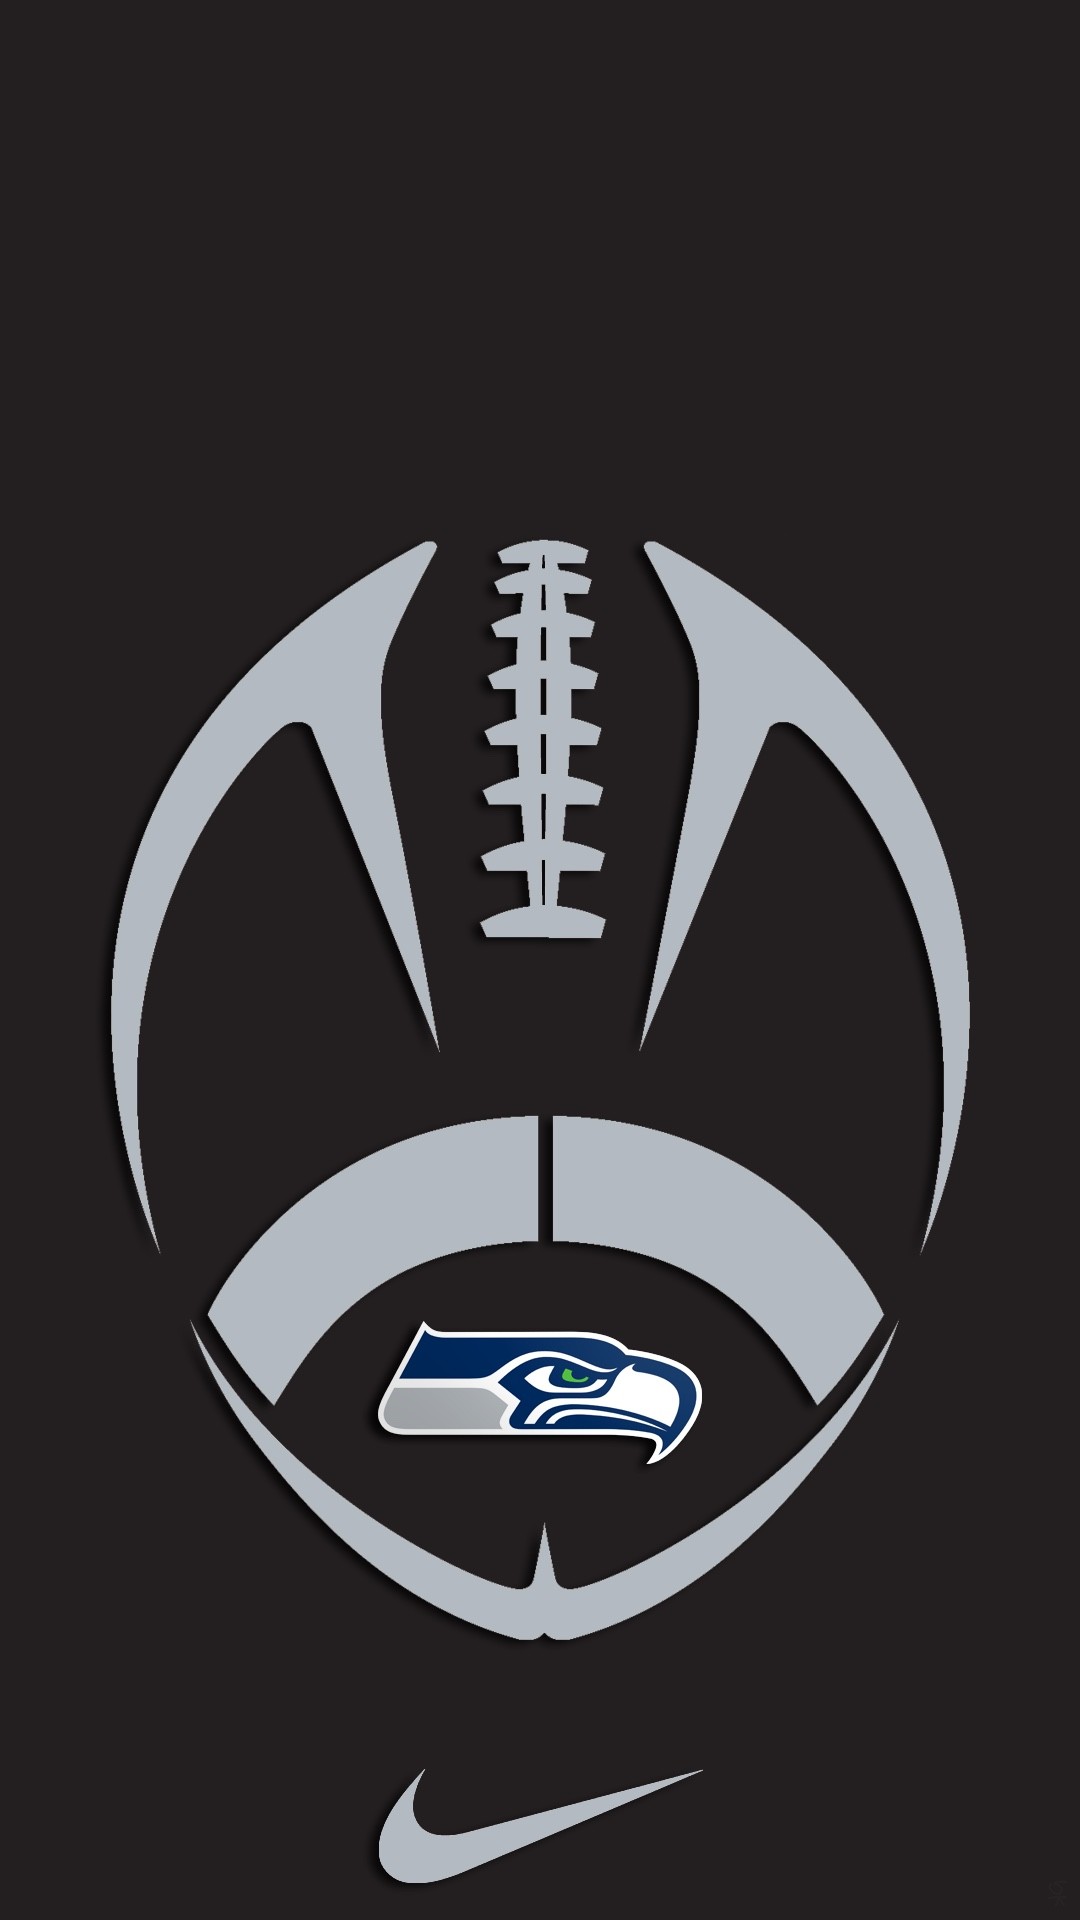 Seattle Seahawks iPhone Wallpaper Size With high-resolution 1080X1920 pixel. Donwload and set as wallpaper for your iPhone X, iPhone XS home screen backgrounds, XS Max, XR, iPhone8 lock screen wallpaper, iPhone 7, 6, SE, and other mobile devices